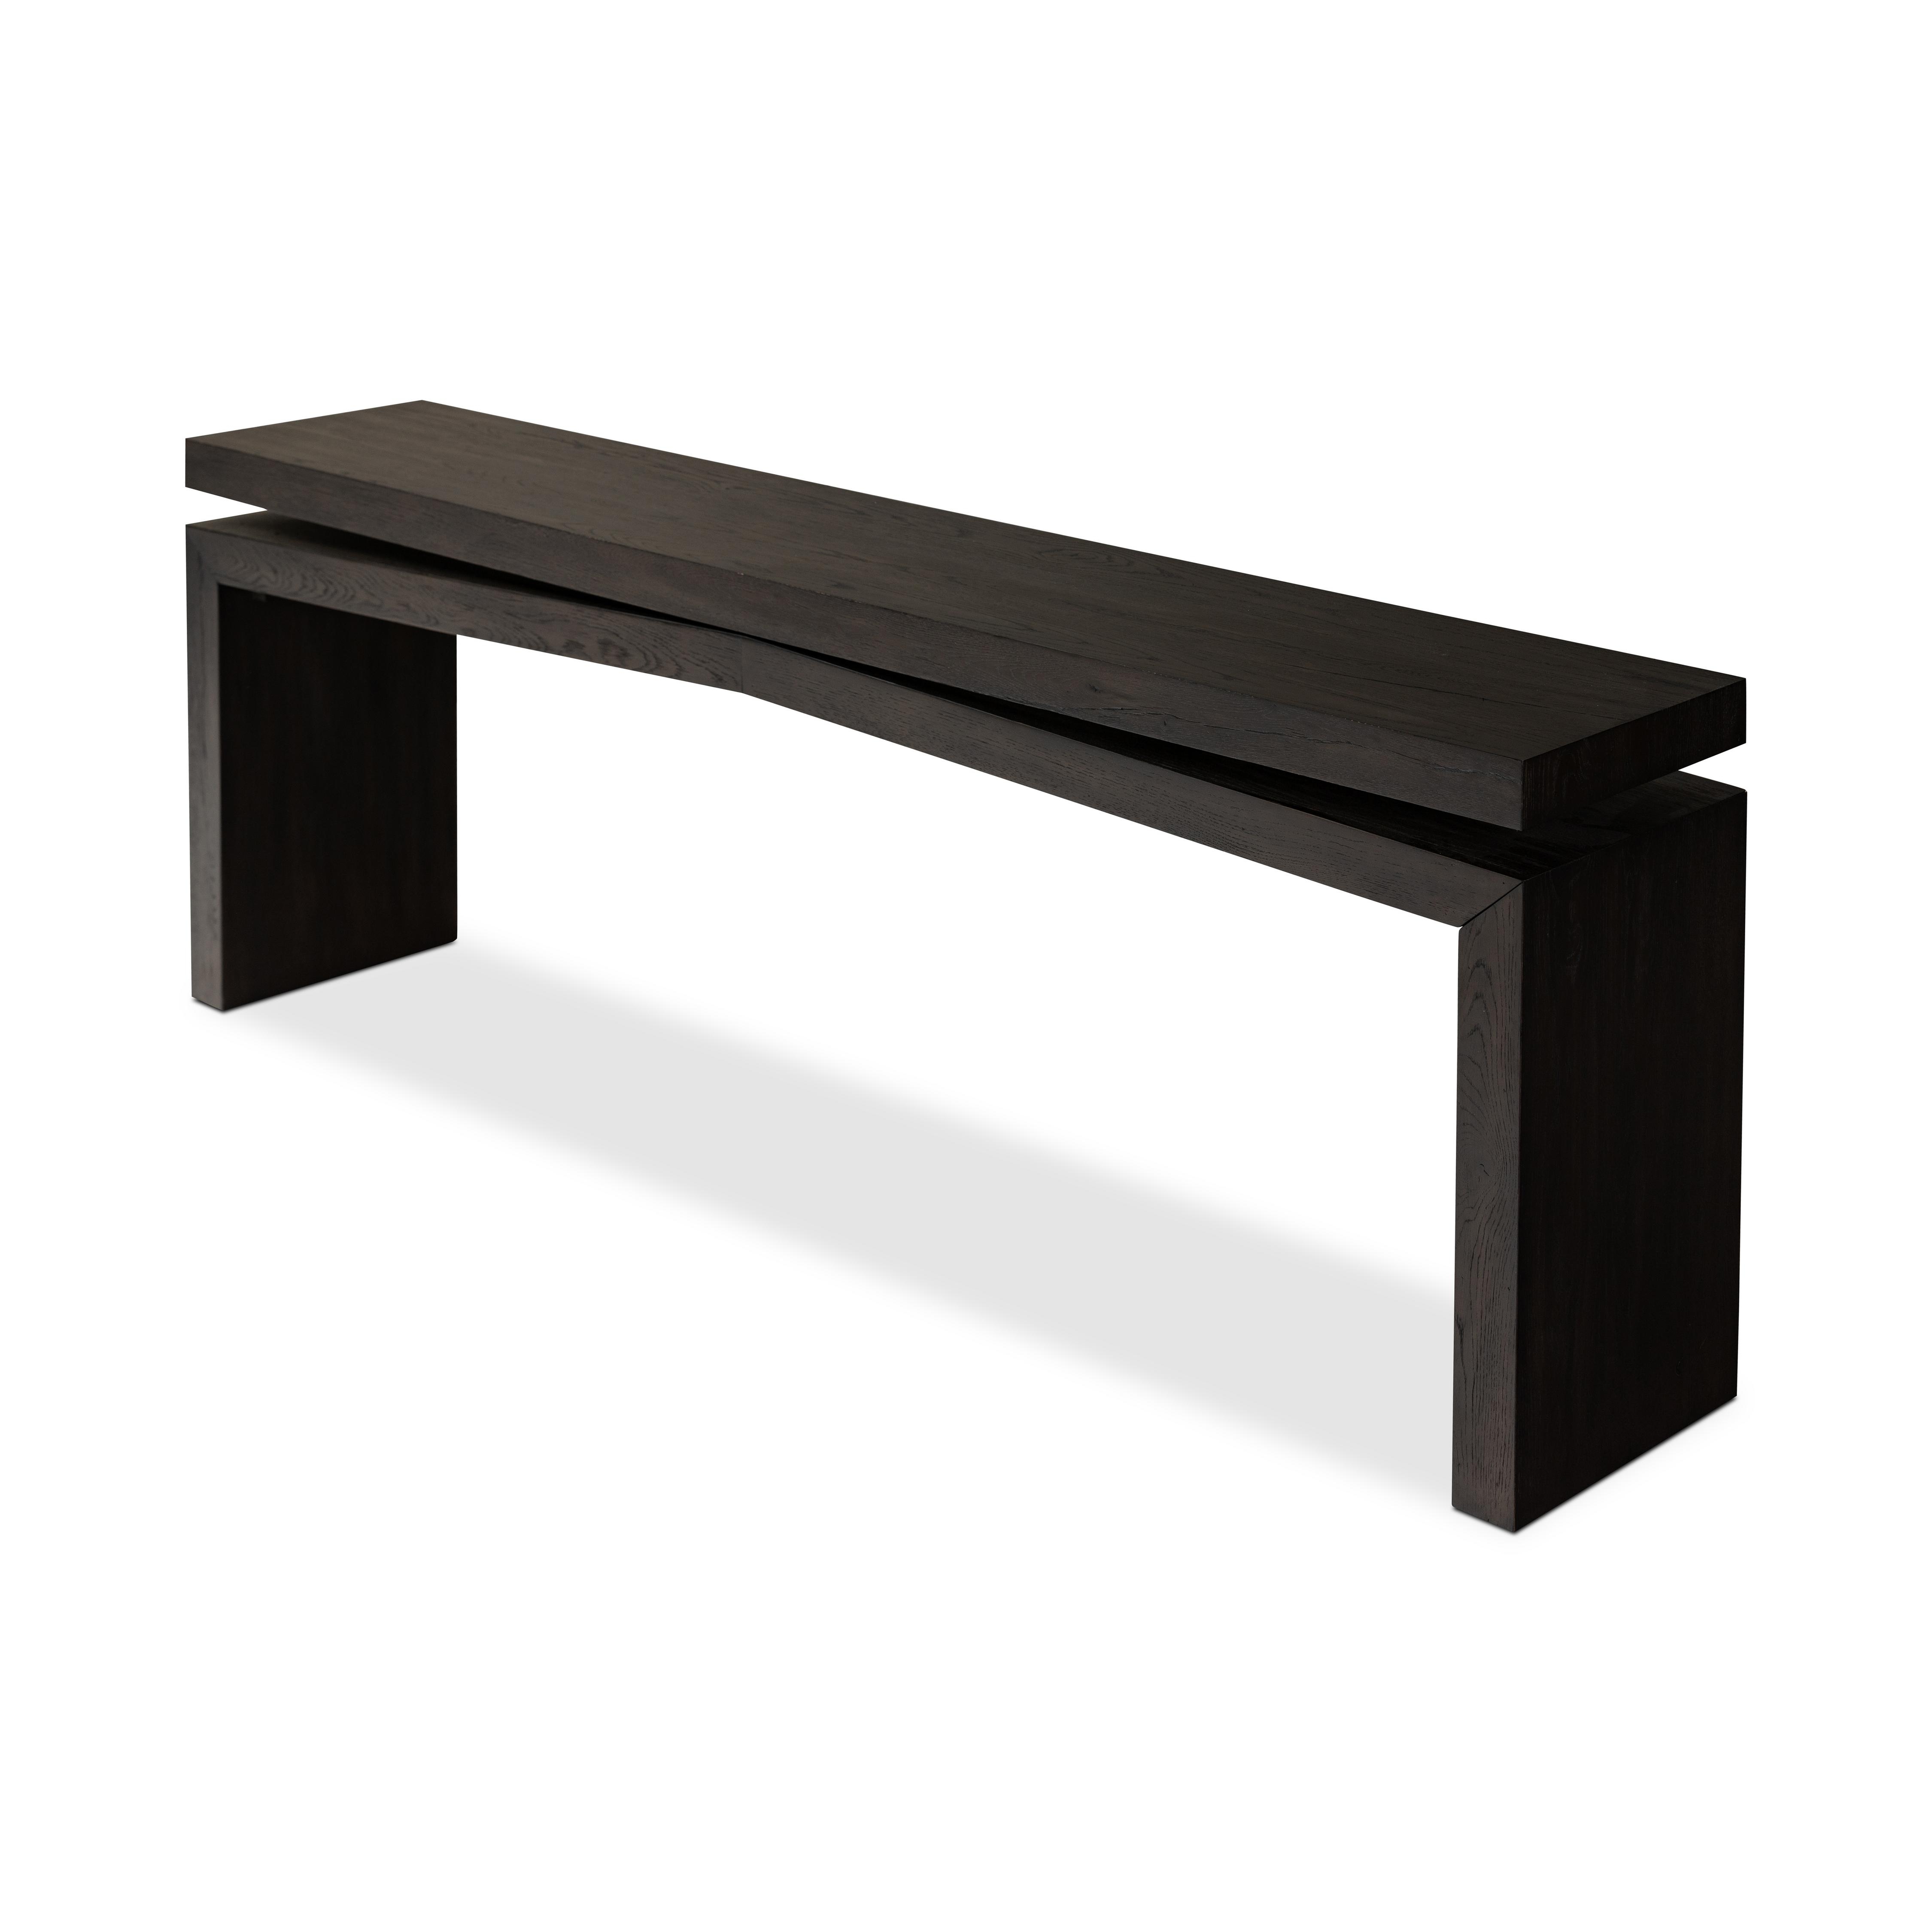 Matthes Console Table-Smoked Black - Image 10